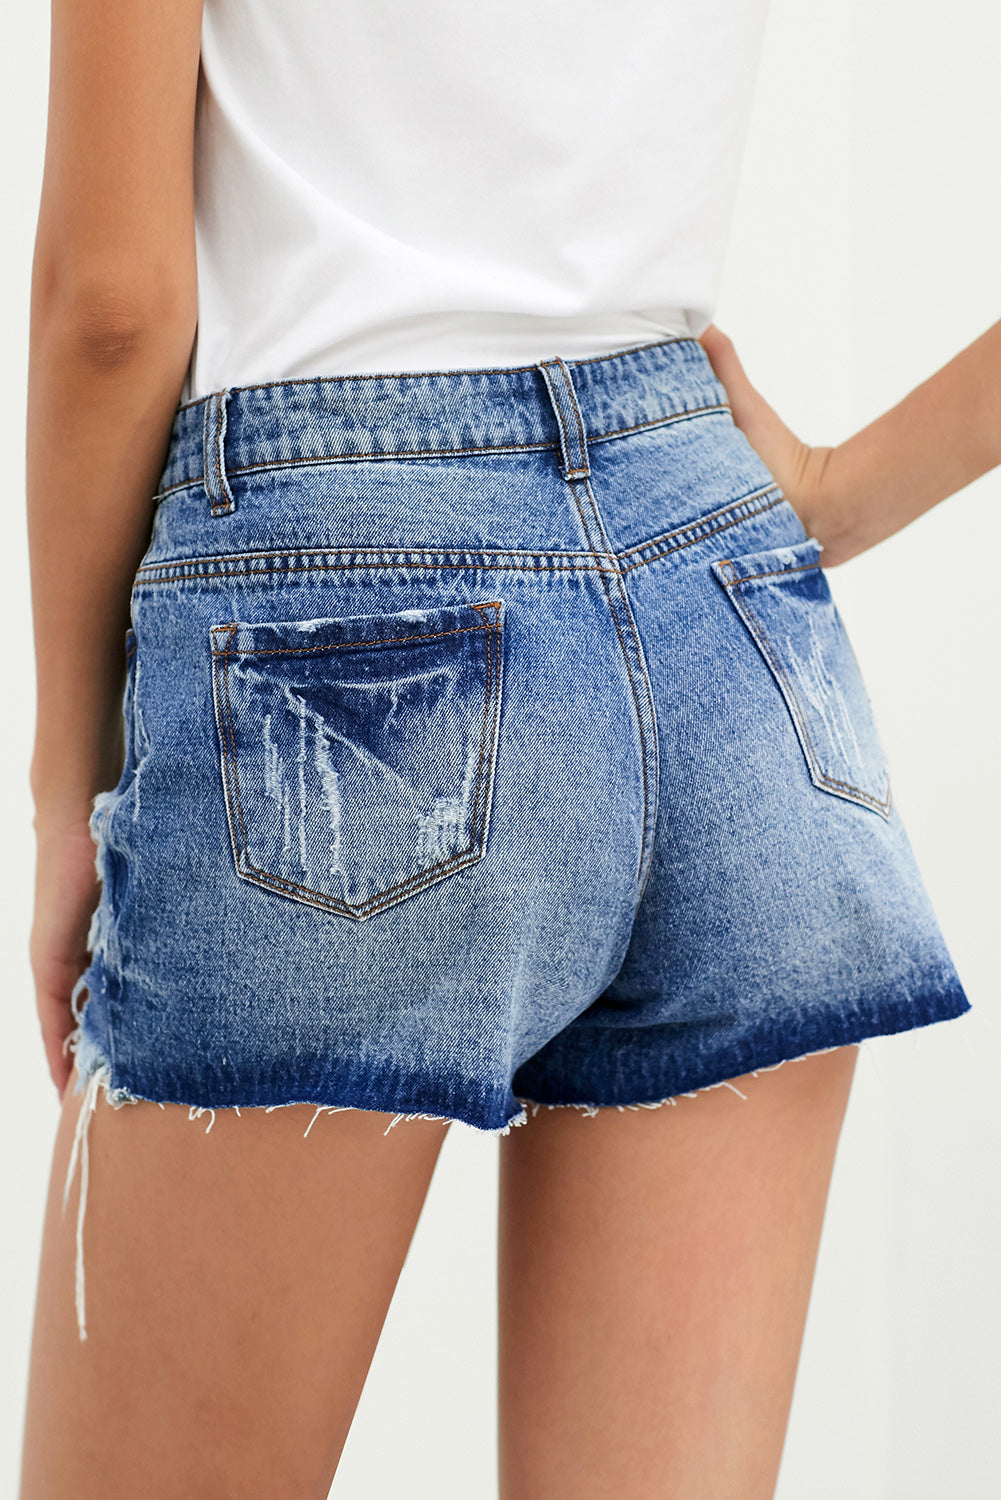 Distressed Button Fly Denim Shorts - Women’s Clothing & Accessories - Shorts - 2 - 2024